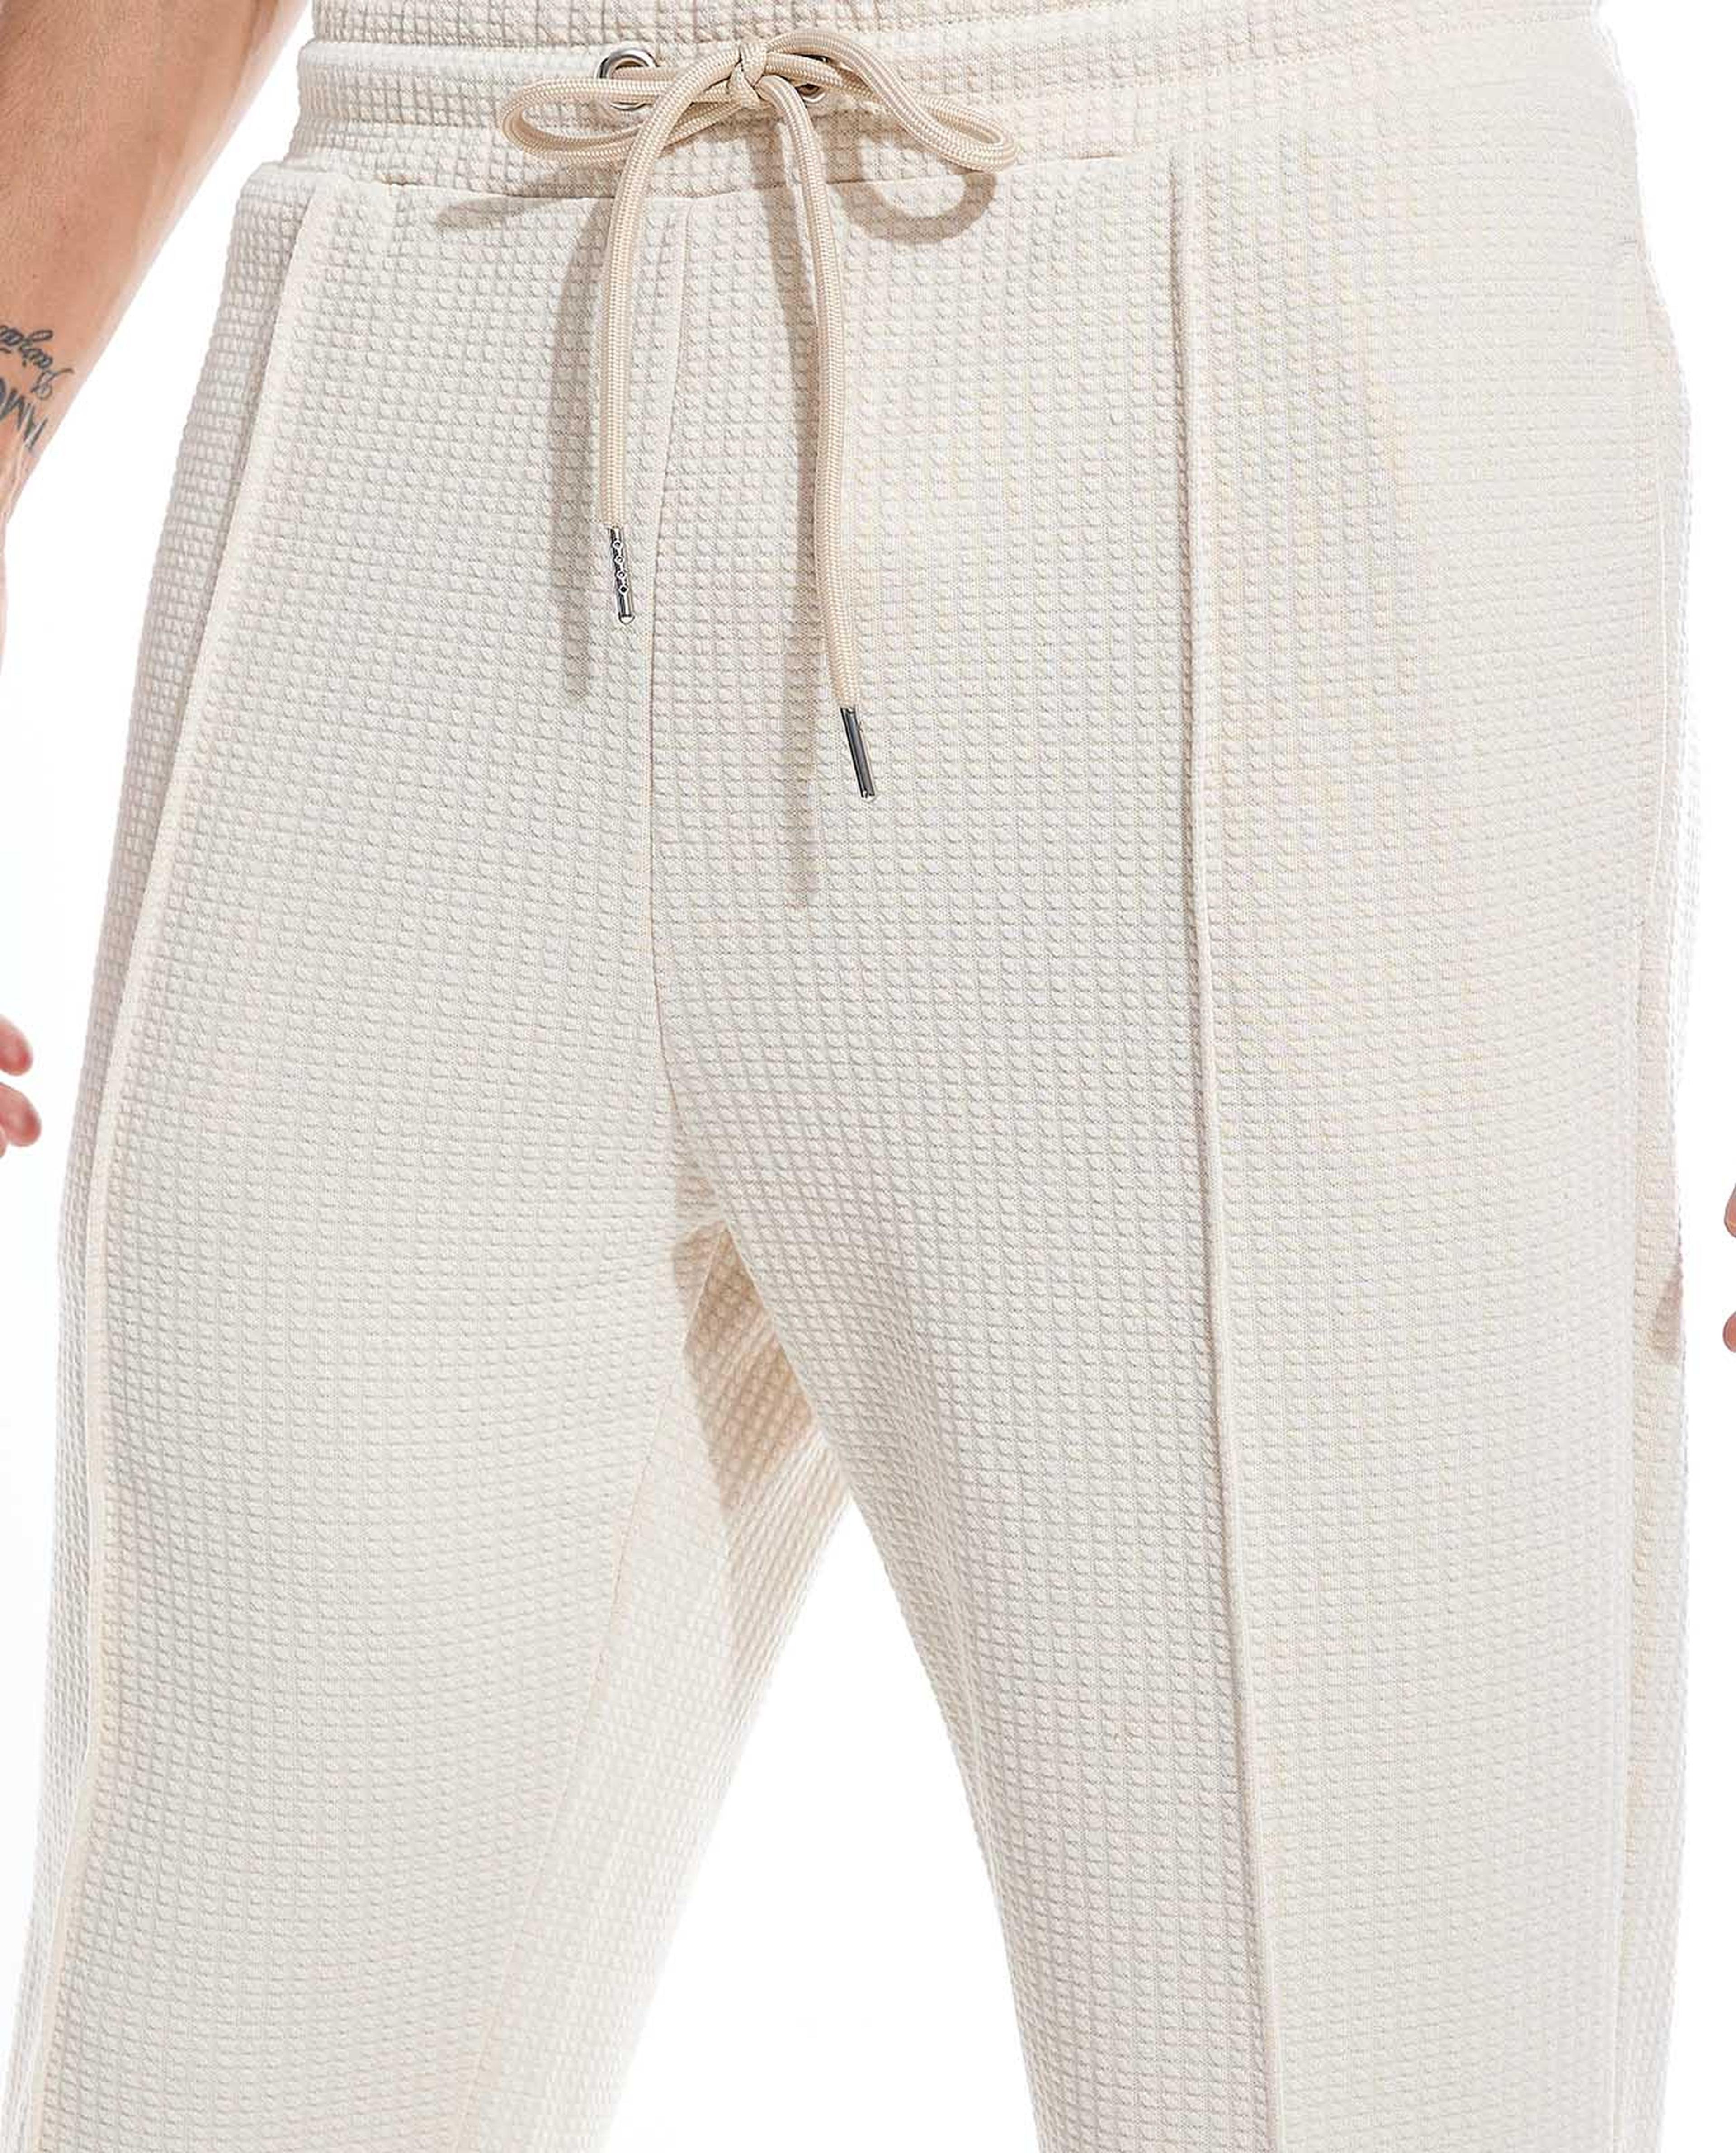 Waffle Textured Pants with Drawstring Waist